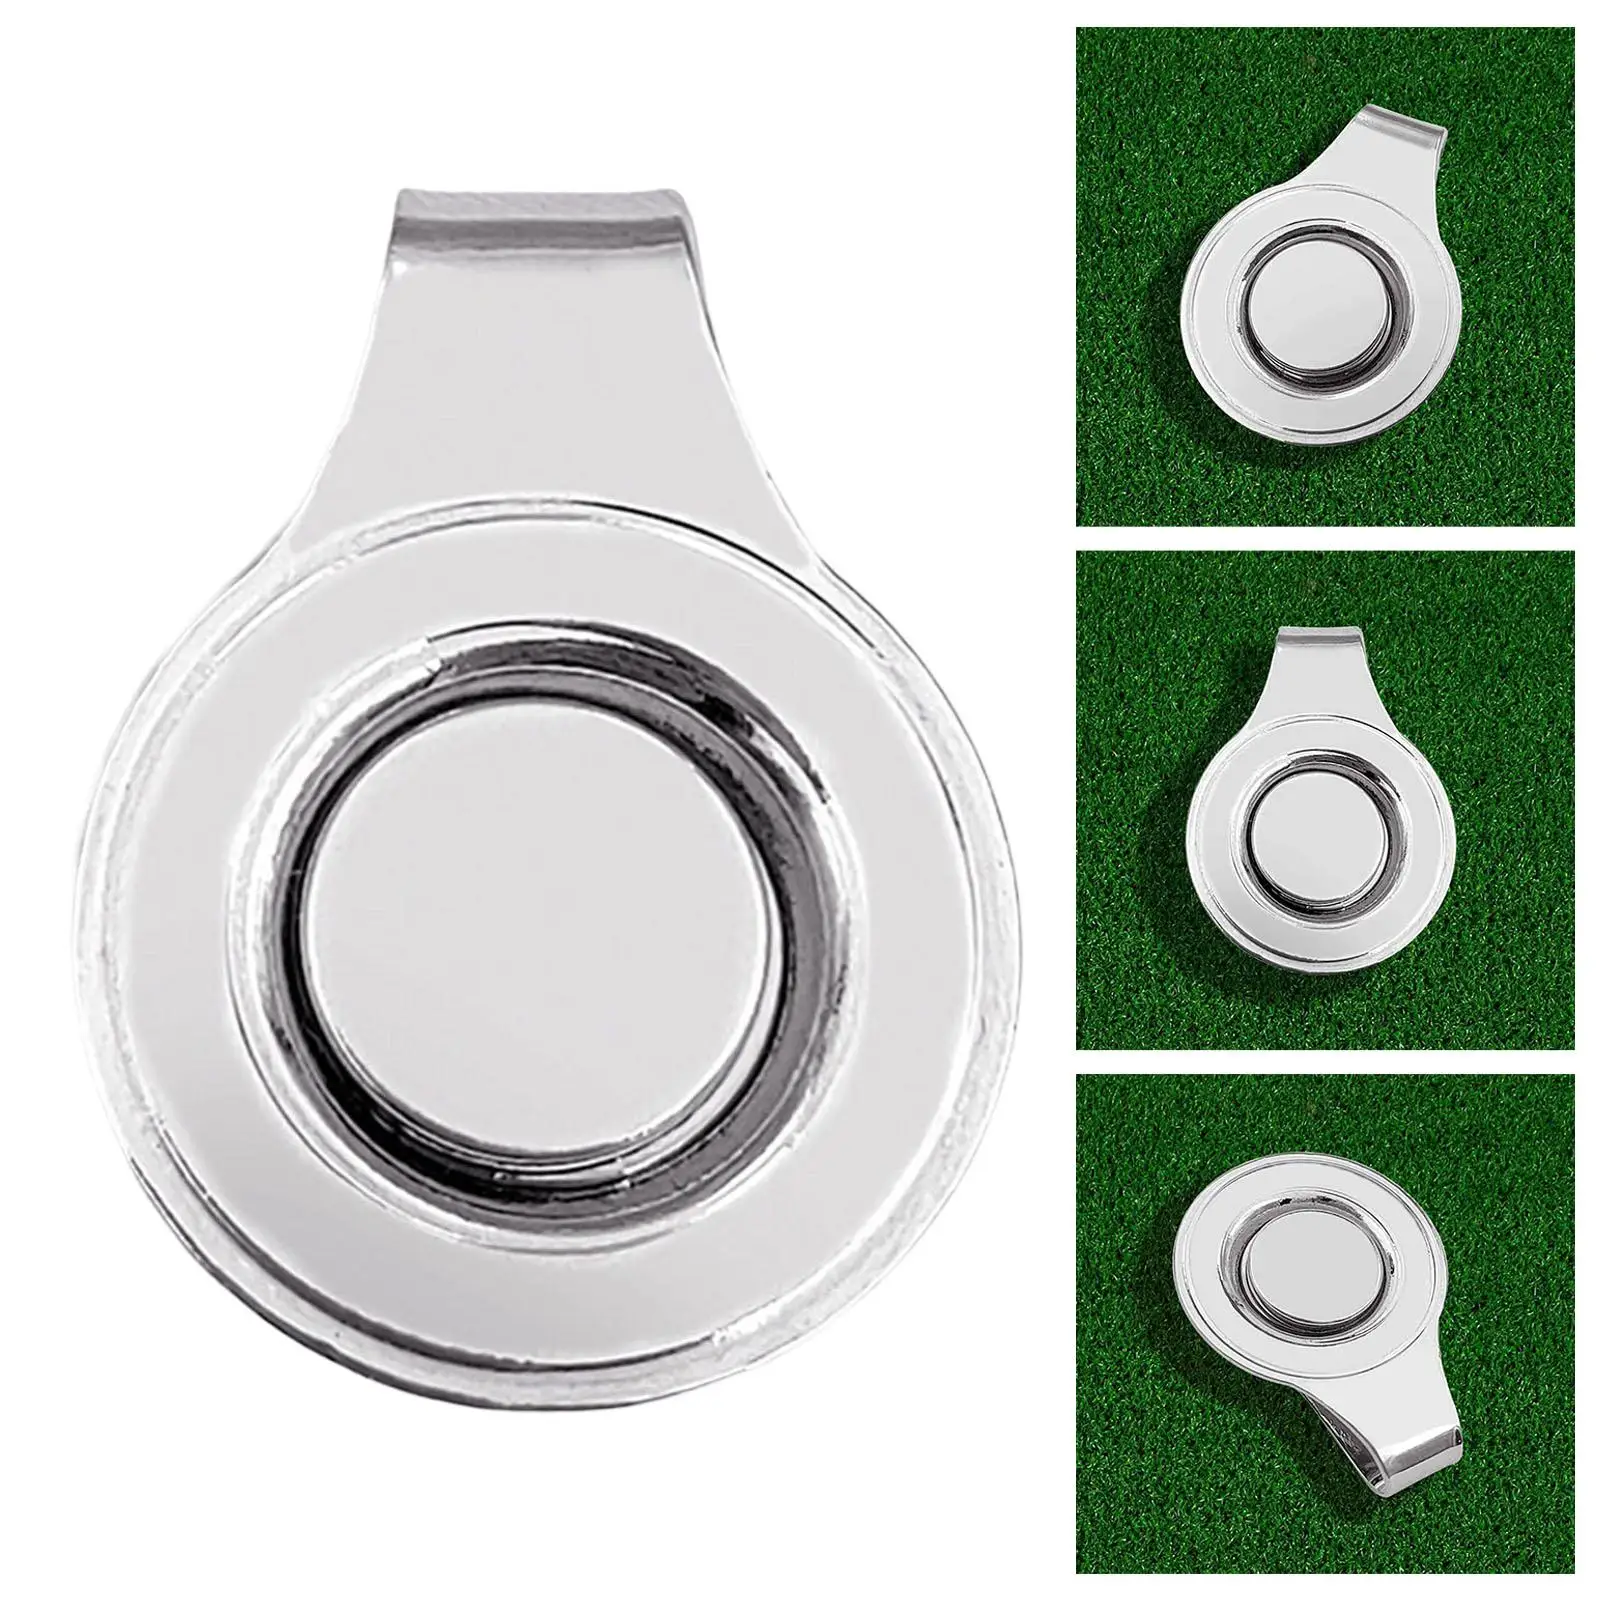 20mm Magnetic Golf Caps Clip Clamp Ball Marker Holder Lightweight Durable